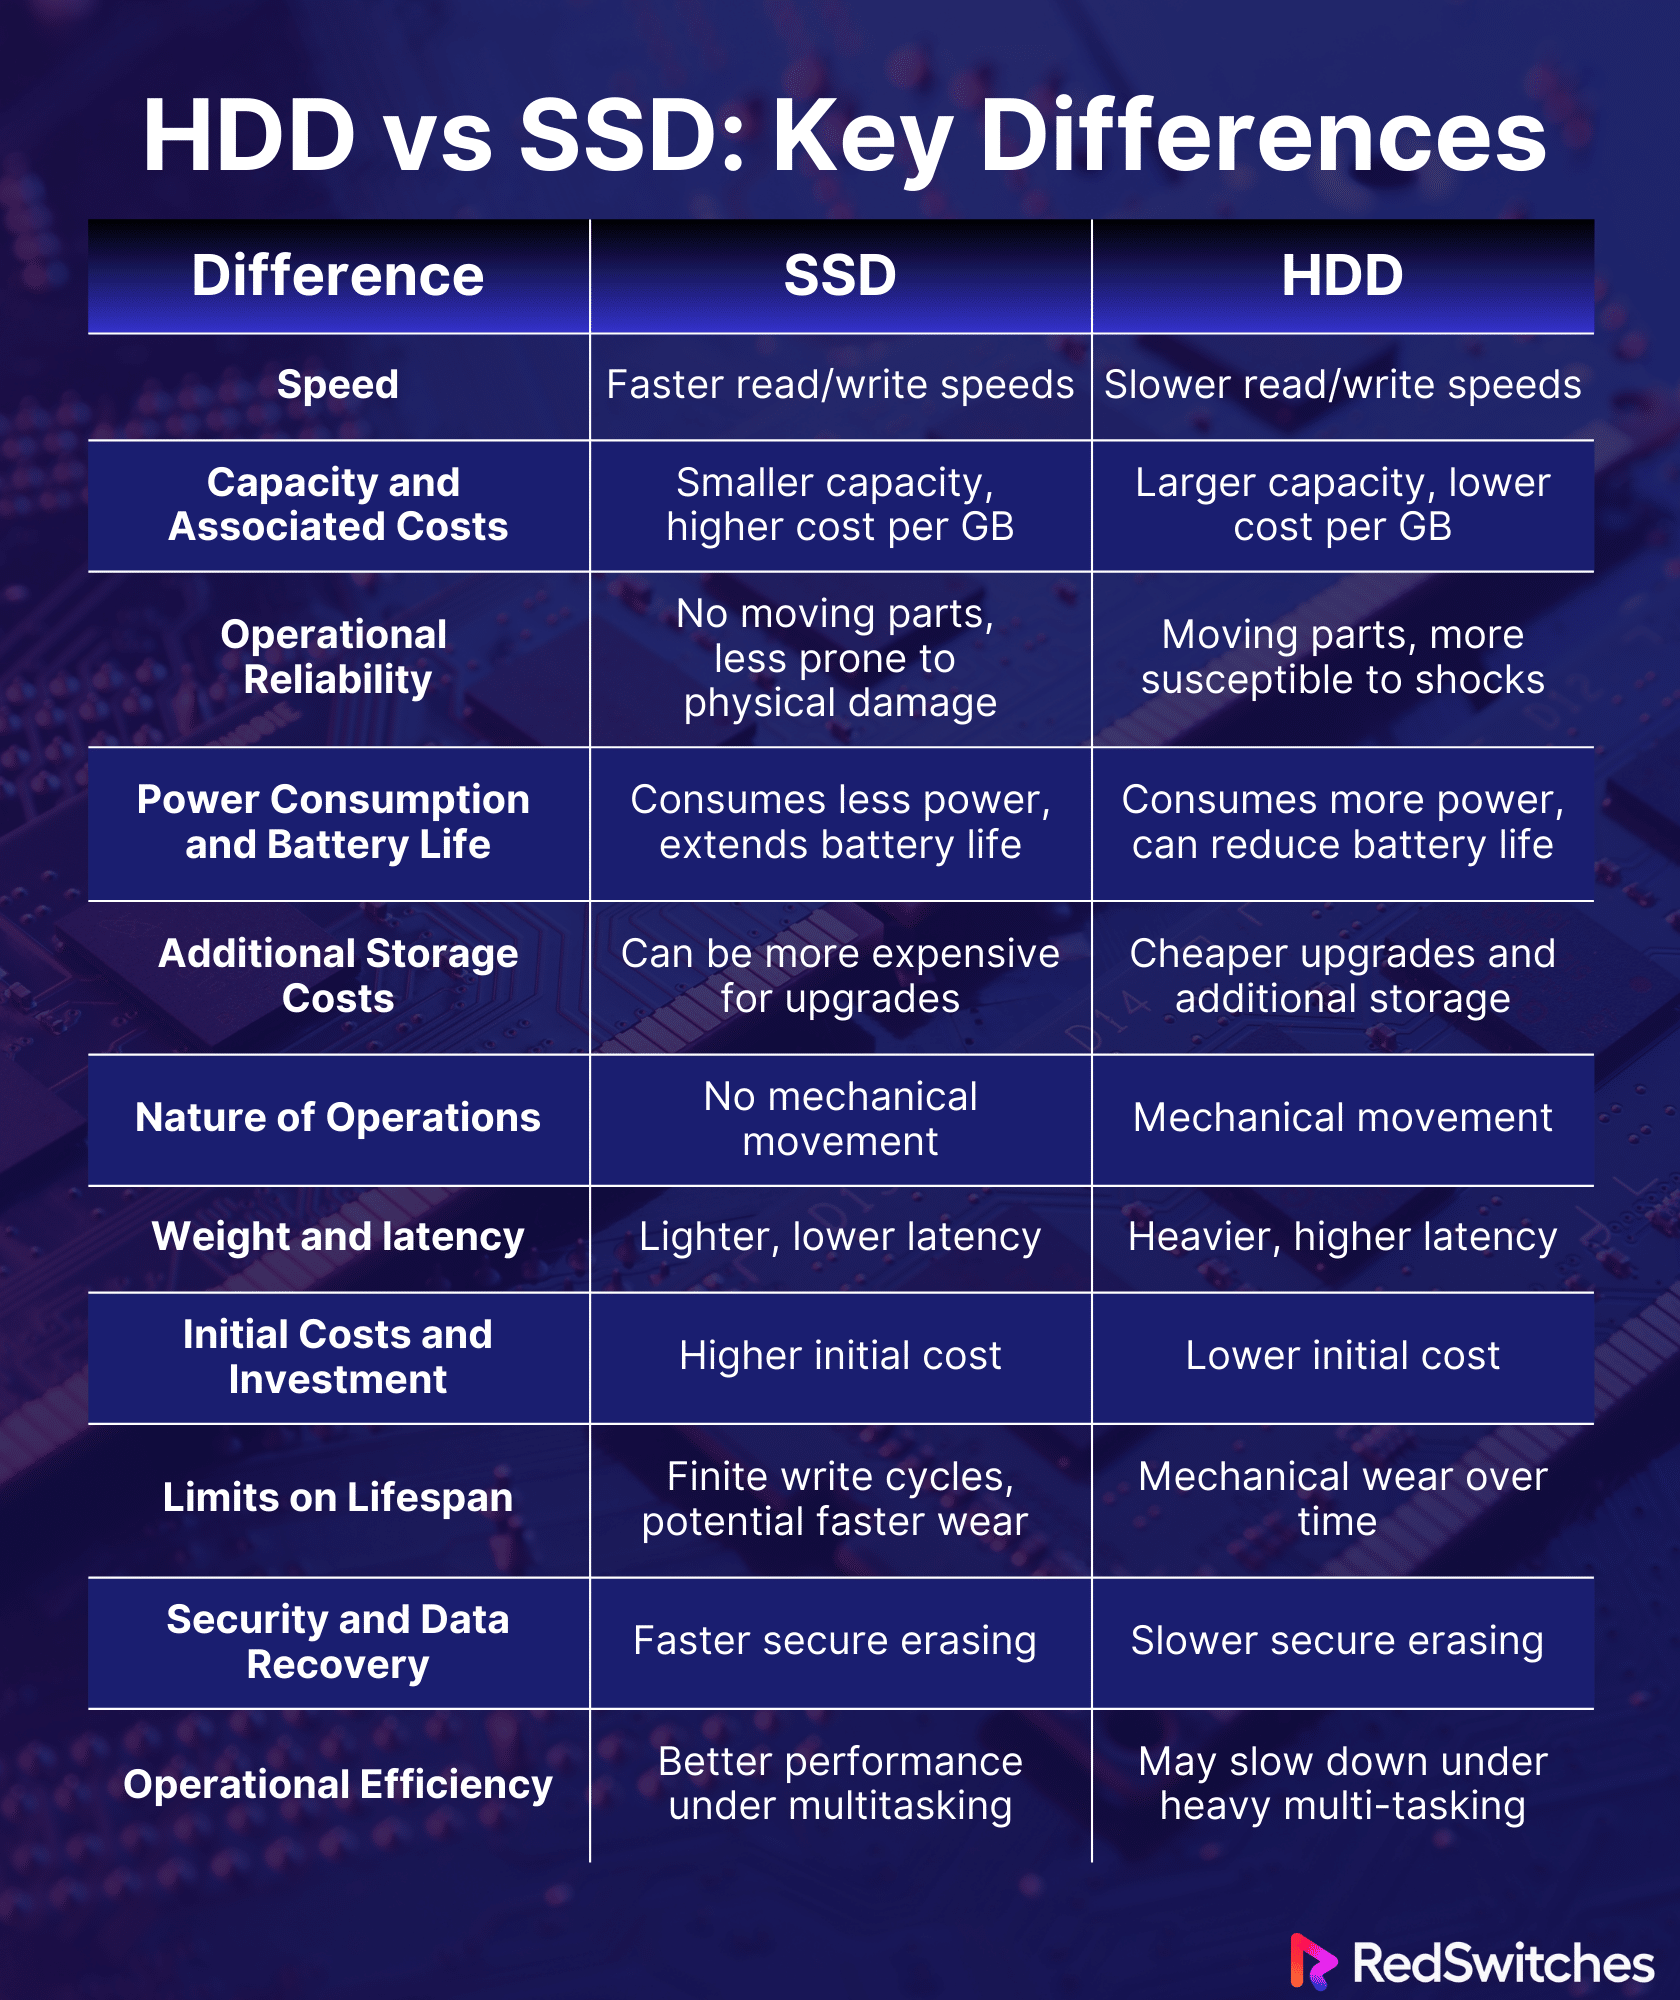 HDD vs SSD Key Differences